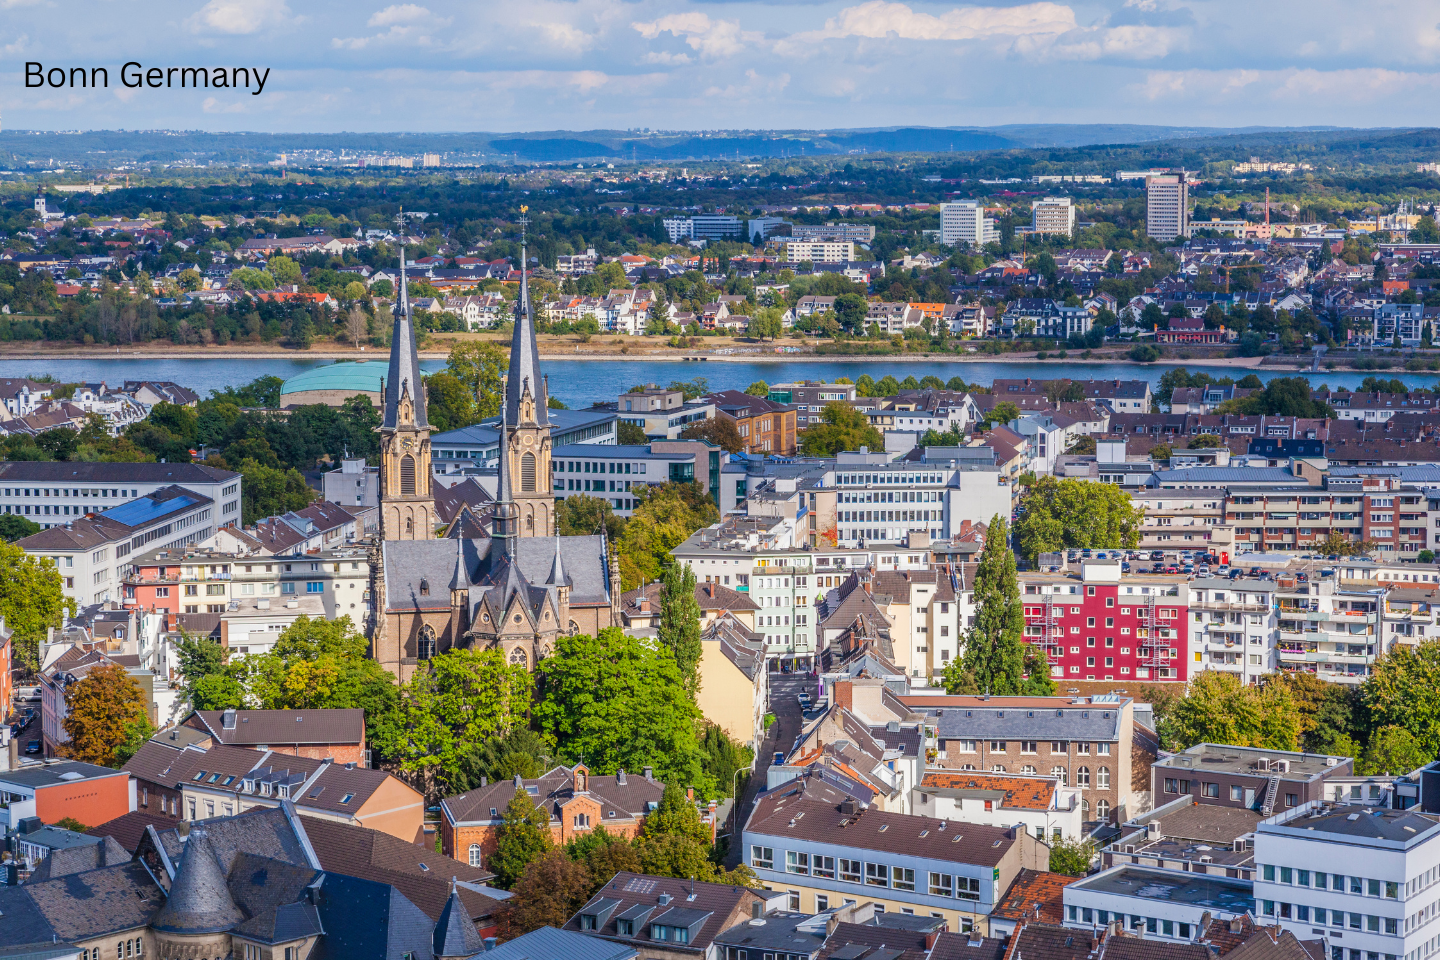 Discovering Bonn Germany: A Journey Through History, Culture, and Innovation